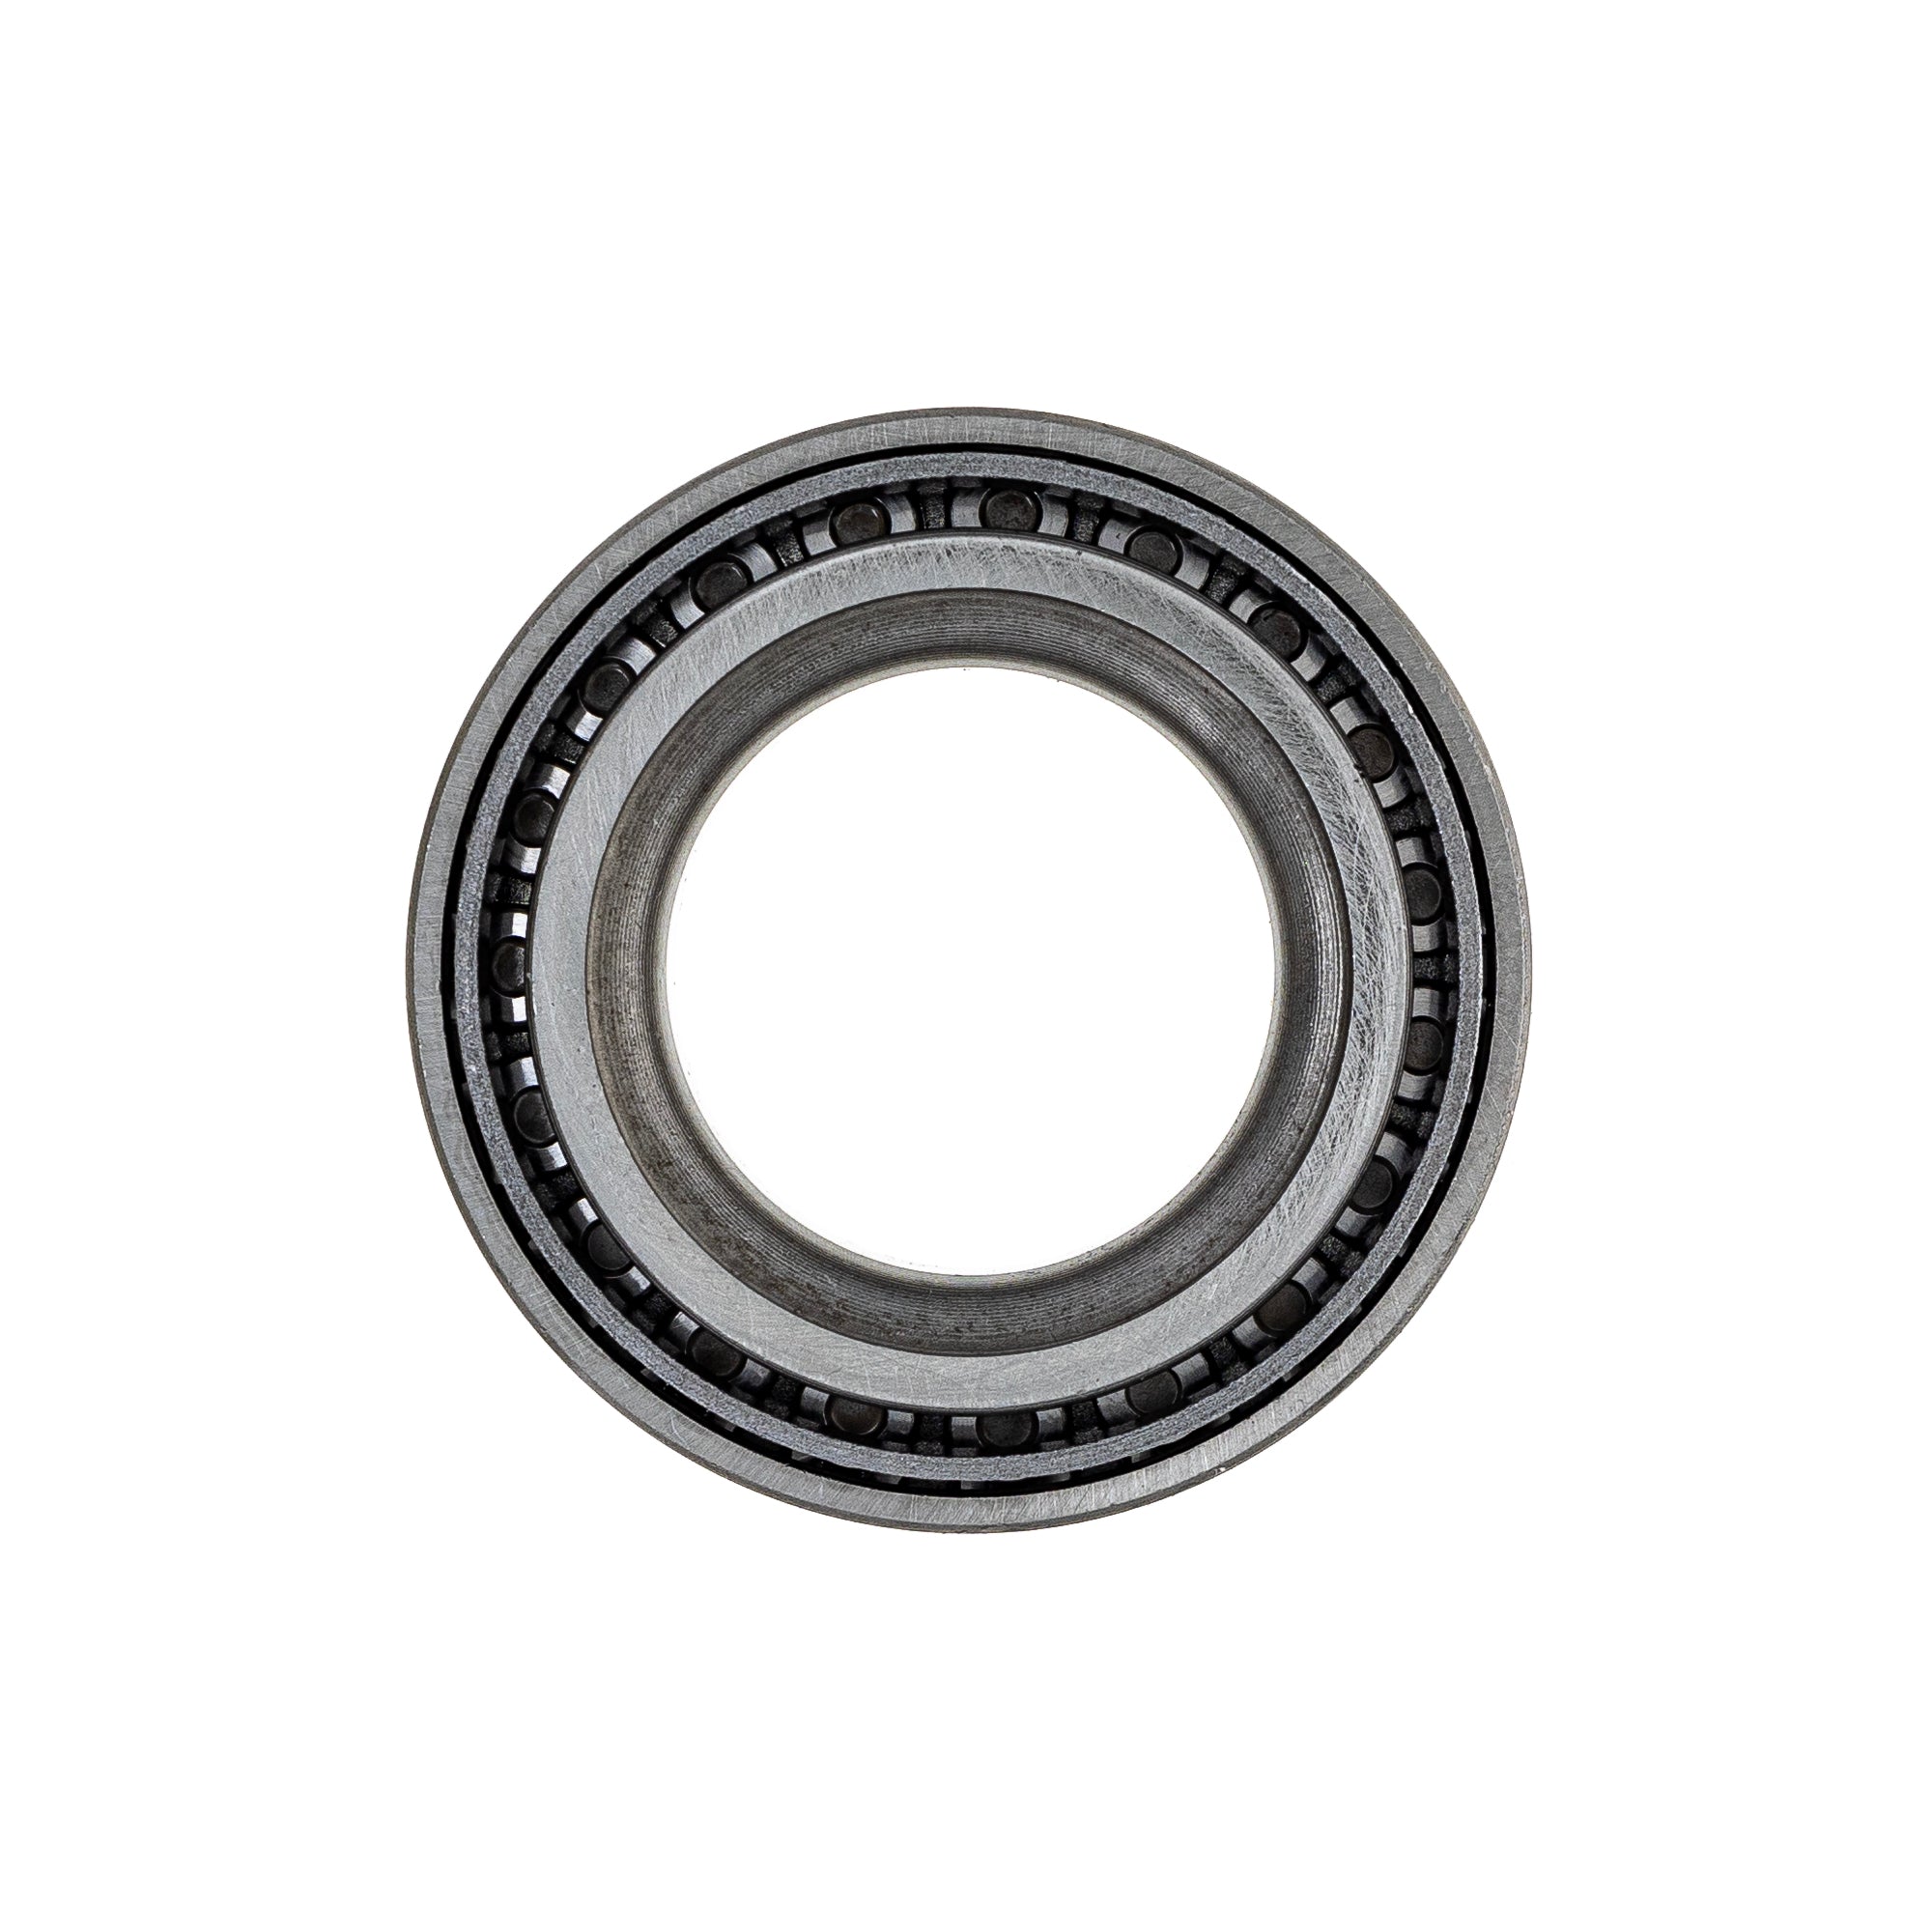 Wheel Bearing 20-1011 27x50.3x15mm Tapered Roller 2 Pack